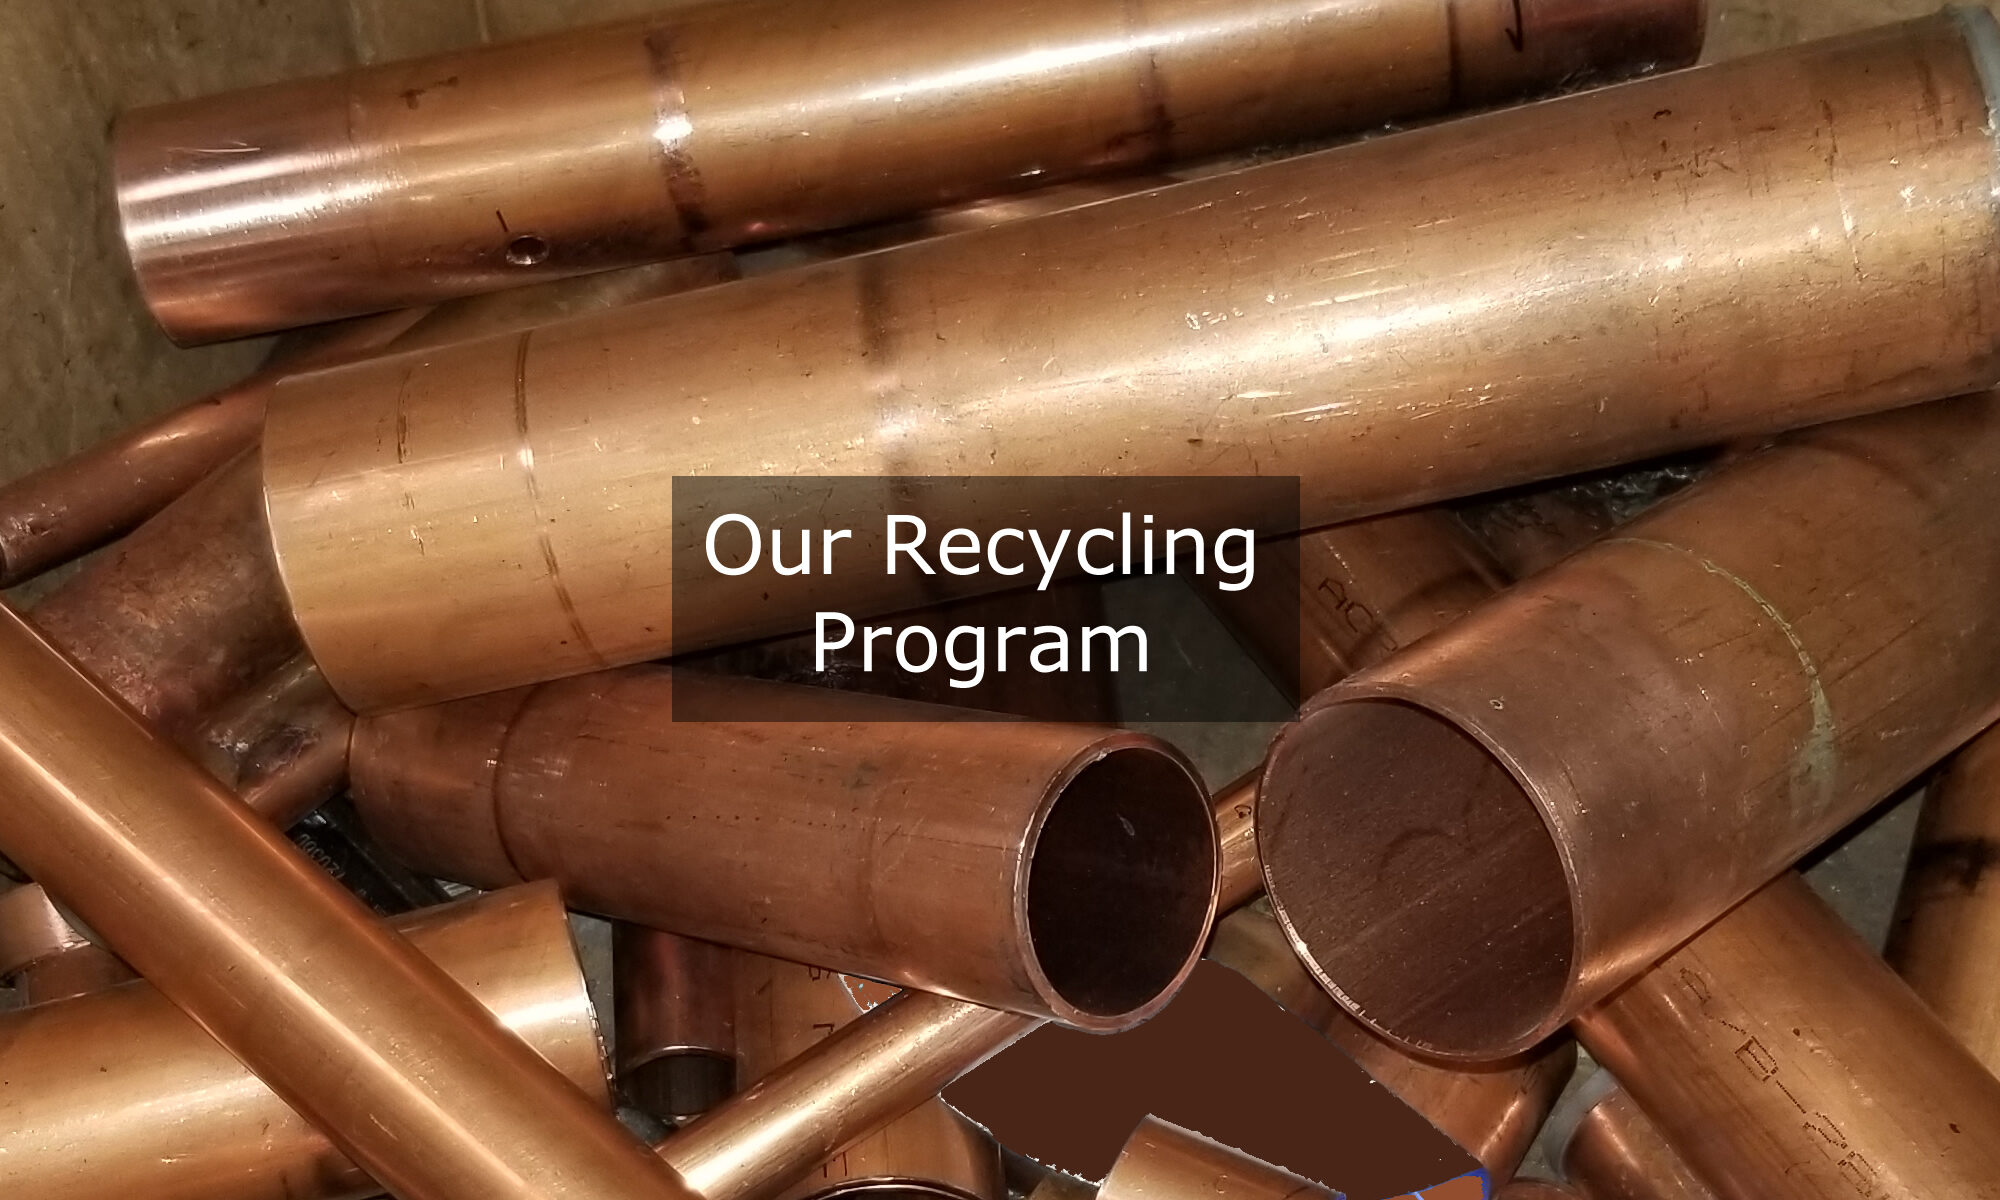 Our Recycling Program